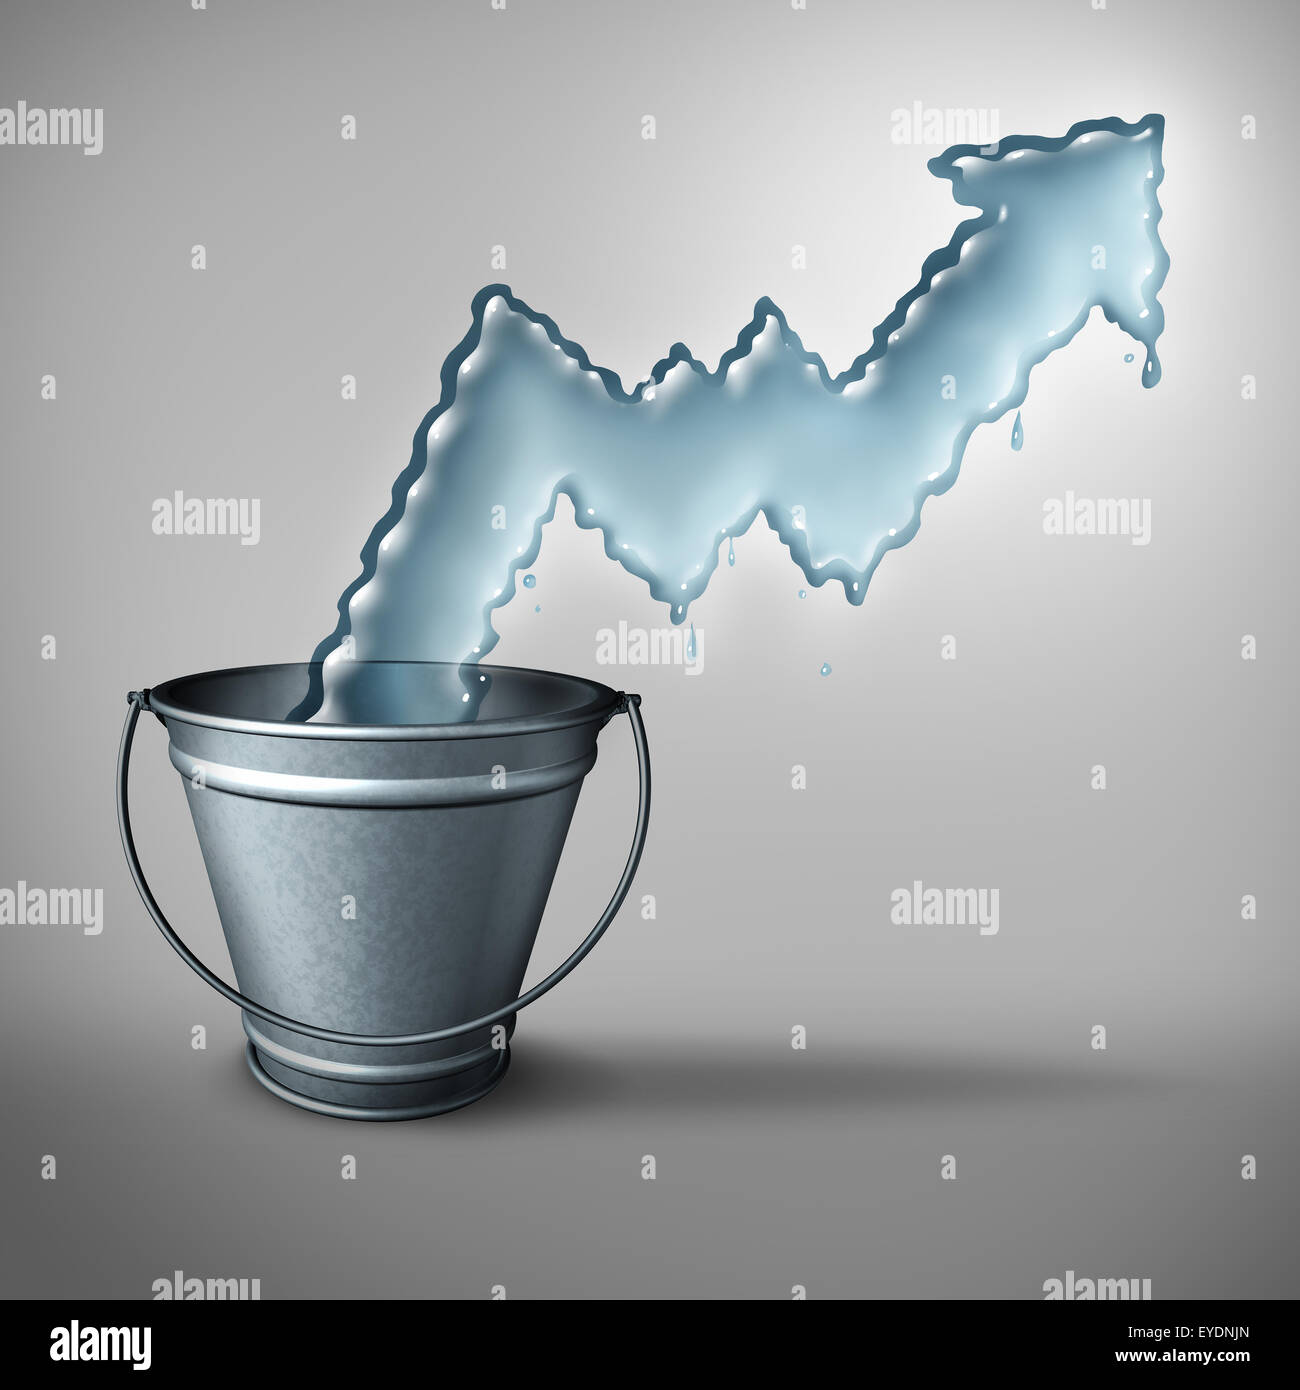 Water demand concept and clean drinking freshwater scarcity crisis as liquid shaped as a rising chart arrow emerging from a metal bucket as a symbol of limited resources and increase in usage restrictions. Stock Photo